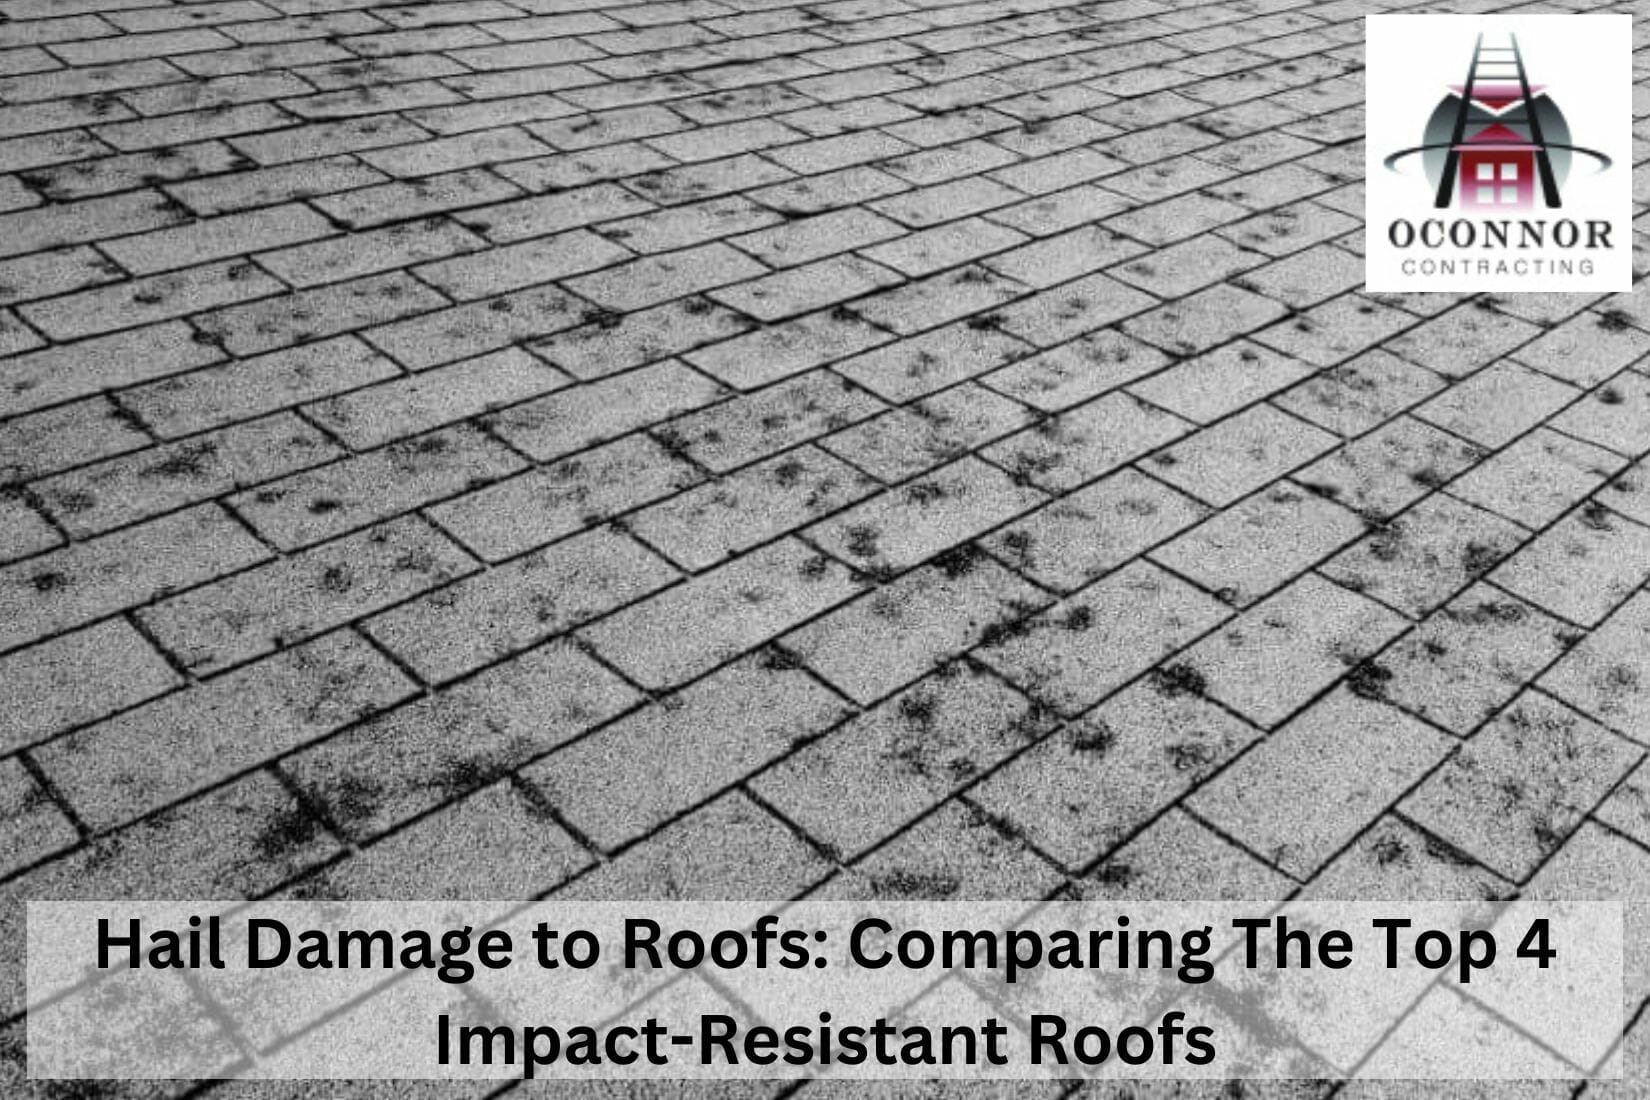 Hail Damage to Roofs: Comparing The Top 4 Impact-Resistant Roofs